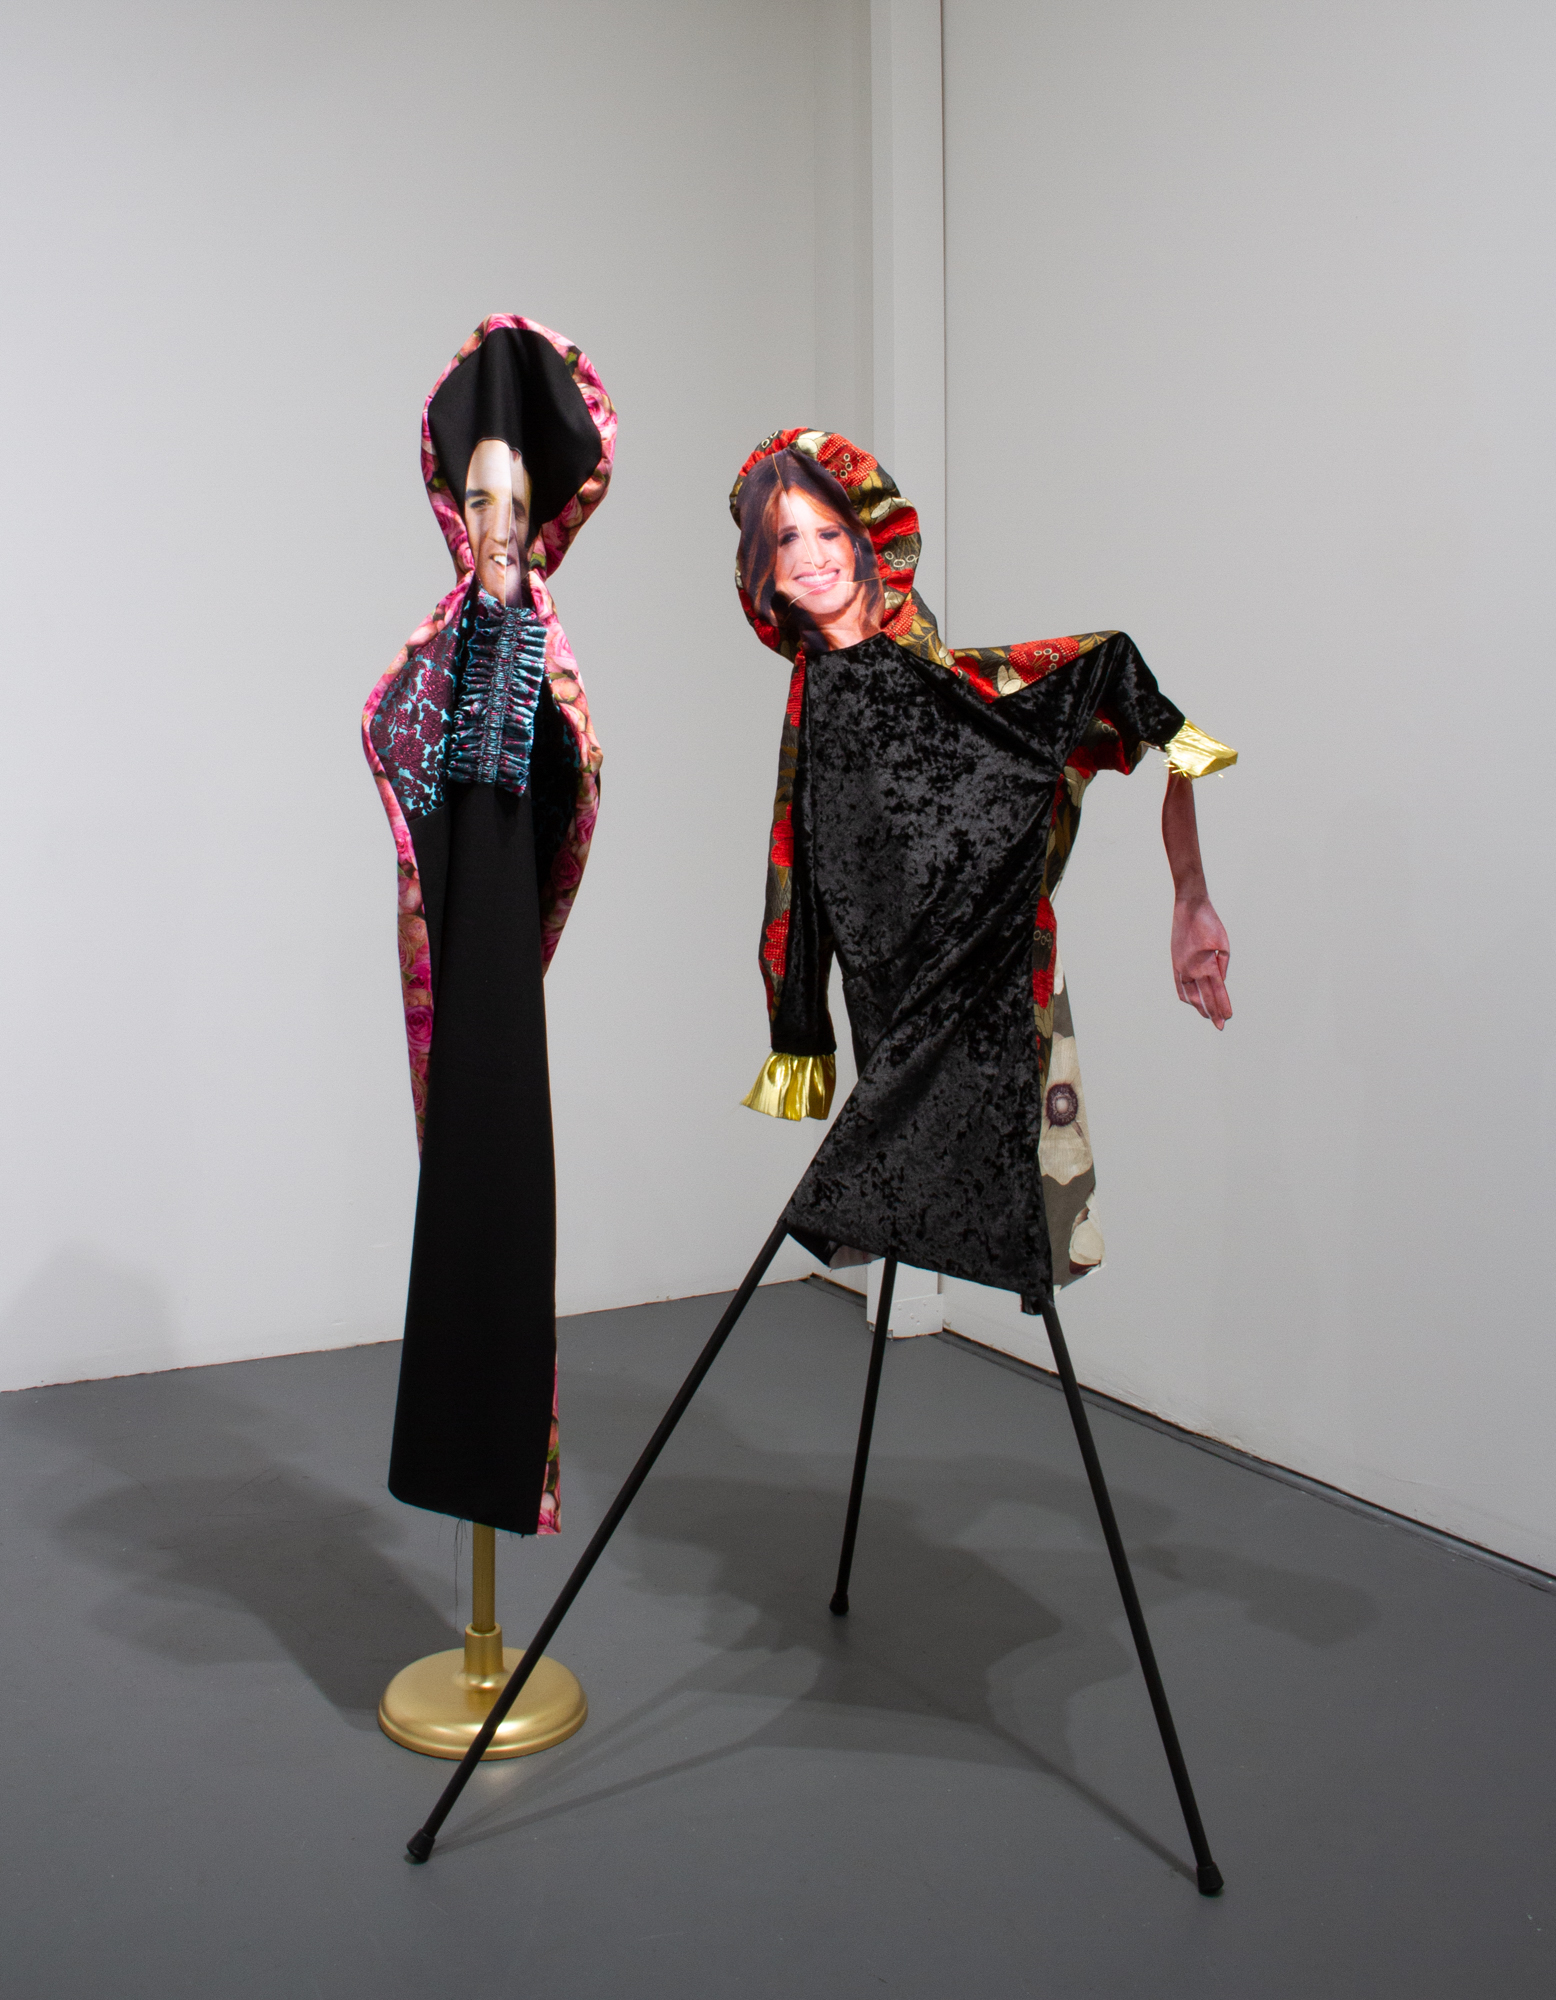  Bean Gilsdorf, Left:  Thin King,  2018, Wool, polyester, brocade, cotton, wood, paint, flag stand, approx. 72 x 12 x 12 in. Right:  MT,  2018, Velvet, cotton, polyester, chenille brocade, wood, paint, approx. 66 x 37 x 29 in. 